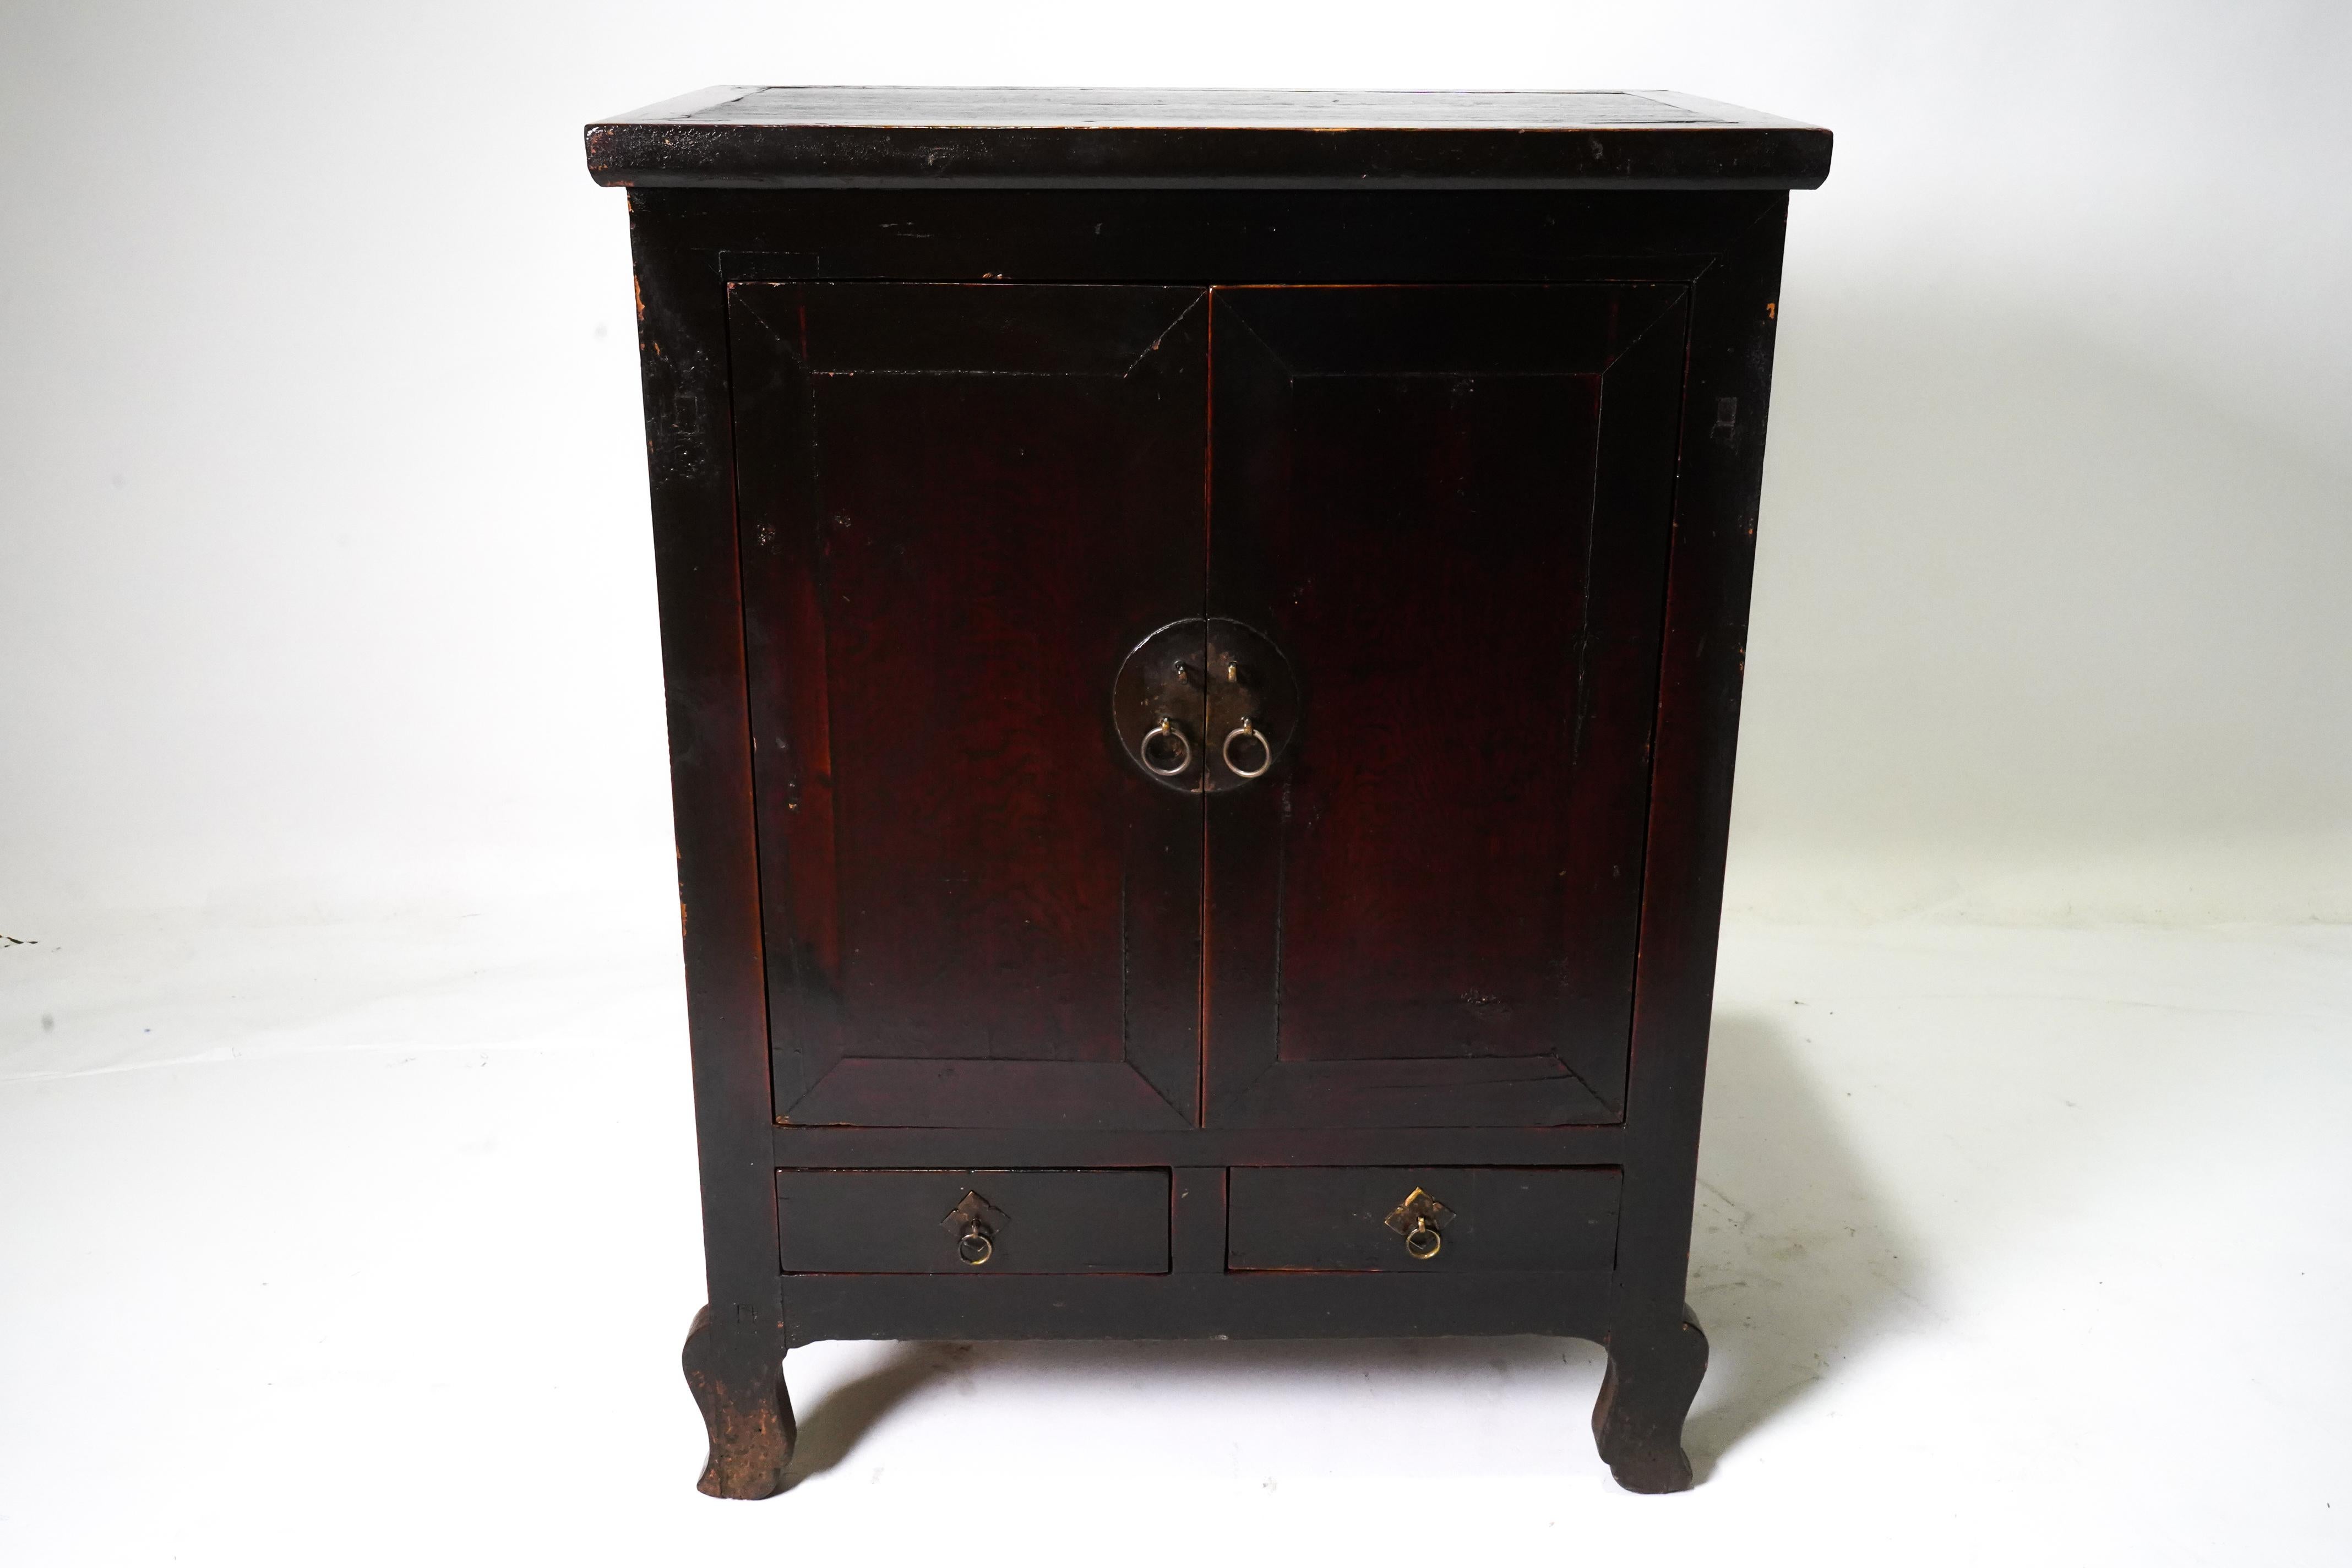 A rare all-original Chinese antique two-door clothing armoire with original brass lock plate and drawer pulls.  The gently aged and patinated oxblood lacquer is fully intact, still protecting the solid elm wood doors and frame.  This piece has great